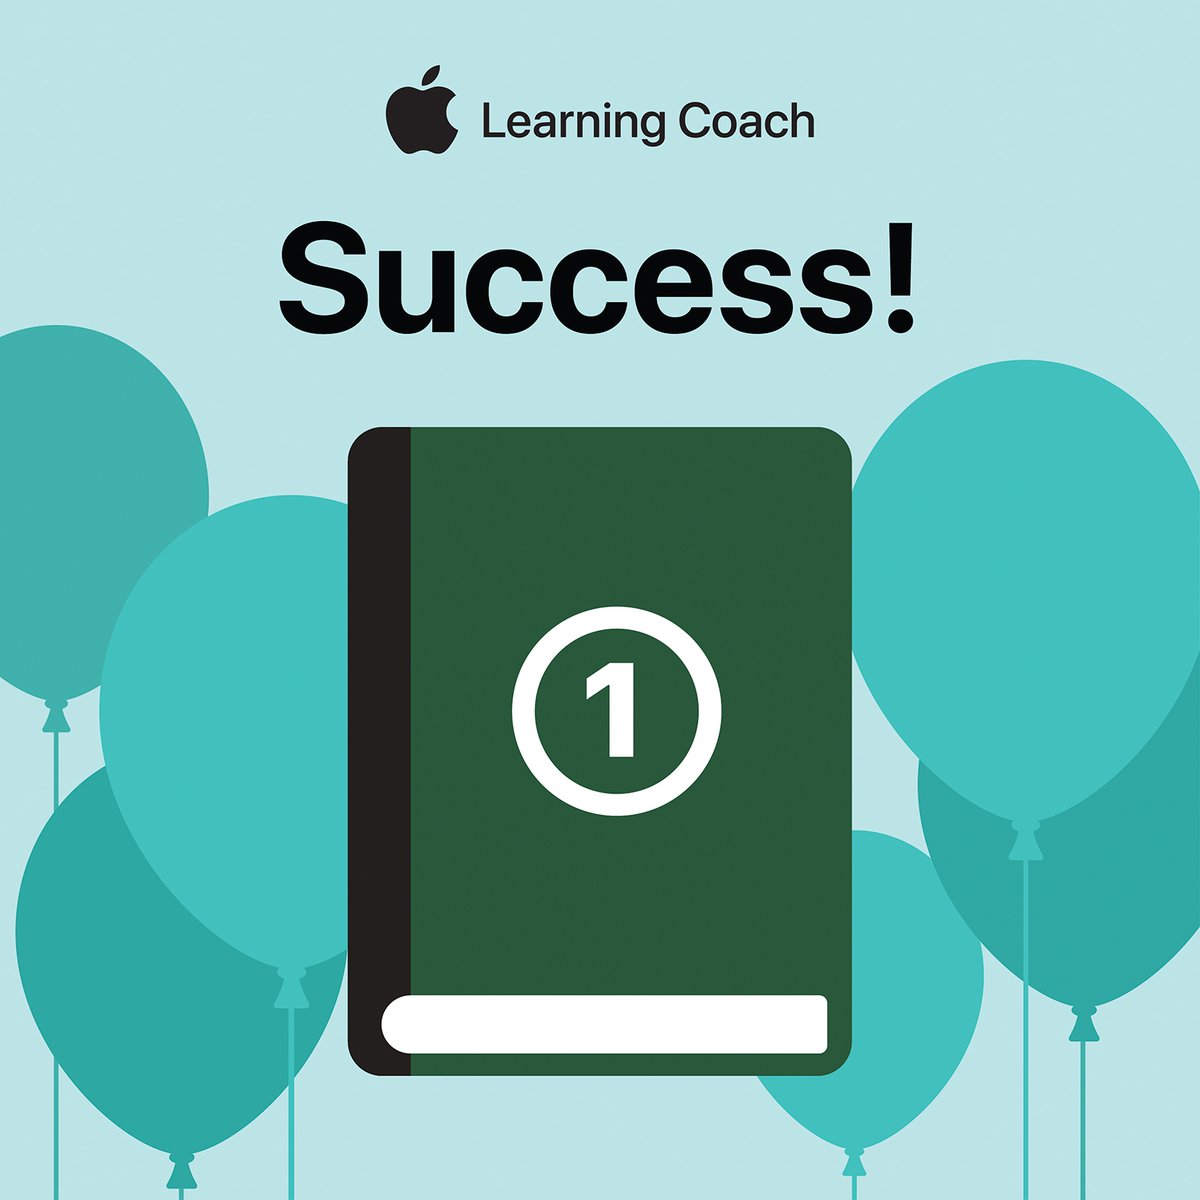 Just finished Unit 1 of the Apple Learning Coach Journey!  Only 5 more to go! Can't wait. @AppleEDU @apsupdate @APSMediaServ #AppleLearningCoach